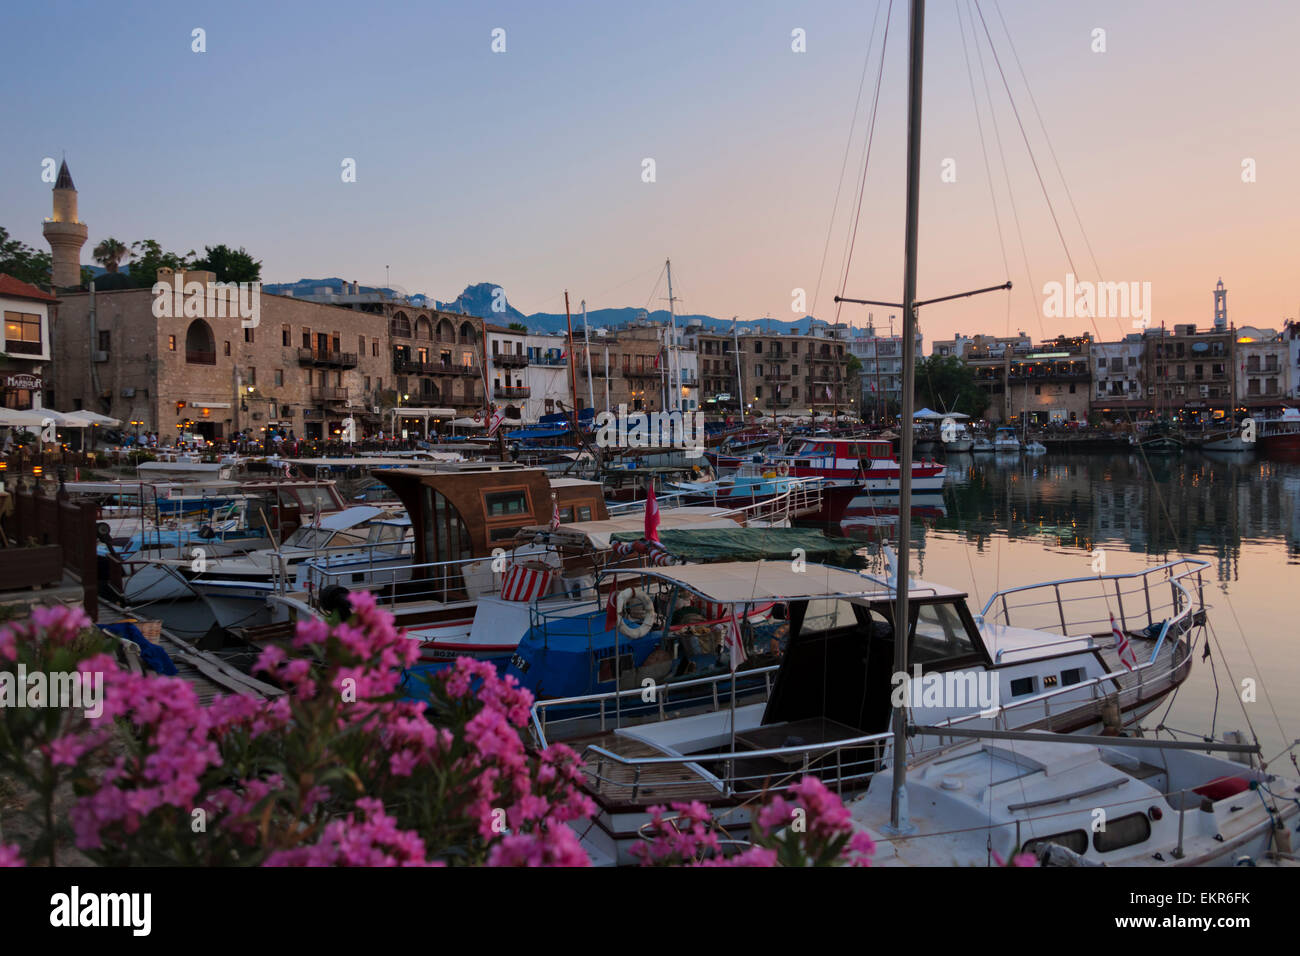 Ship in the harbor at sunset, Kyrenia, Turkish Republic of Northern Cyprus Stock Photo